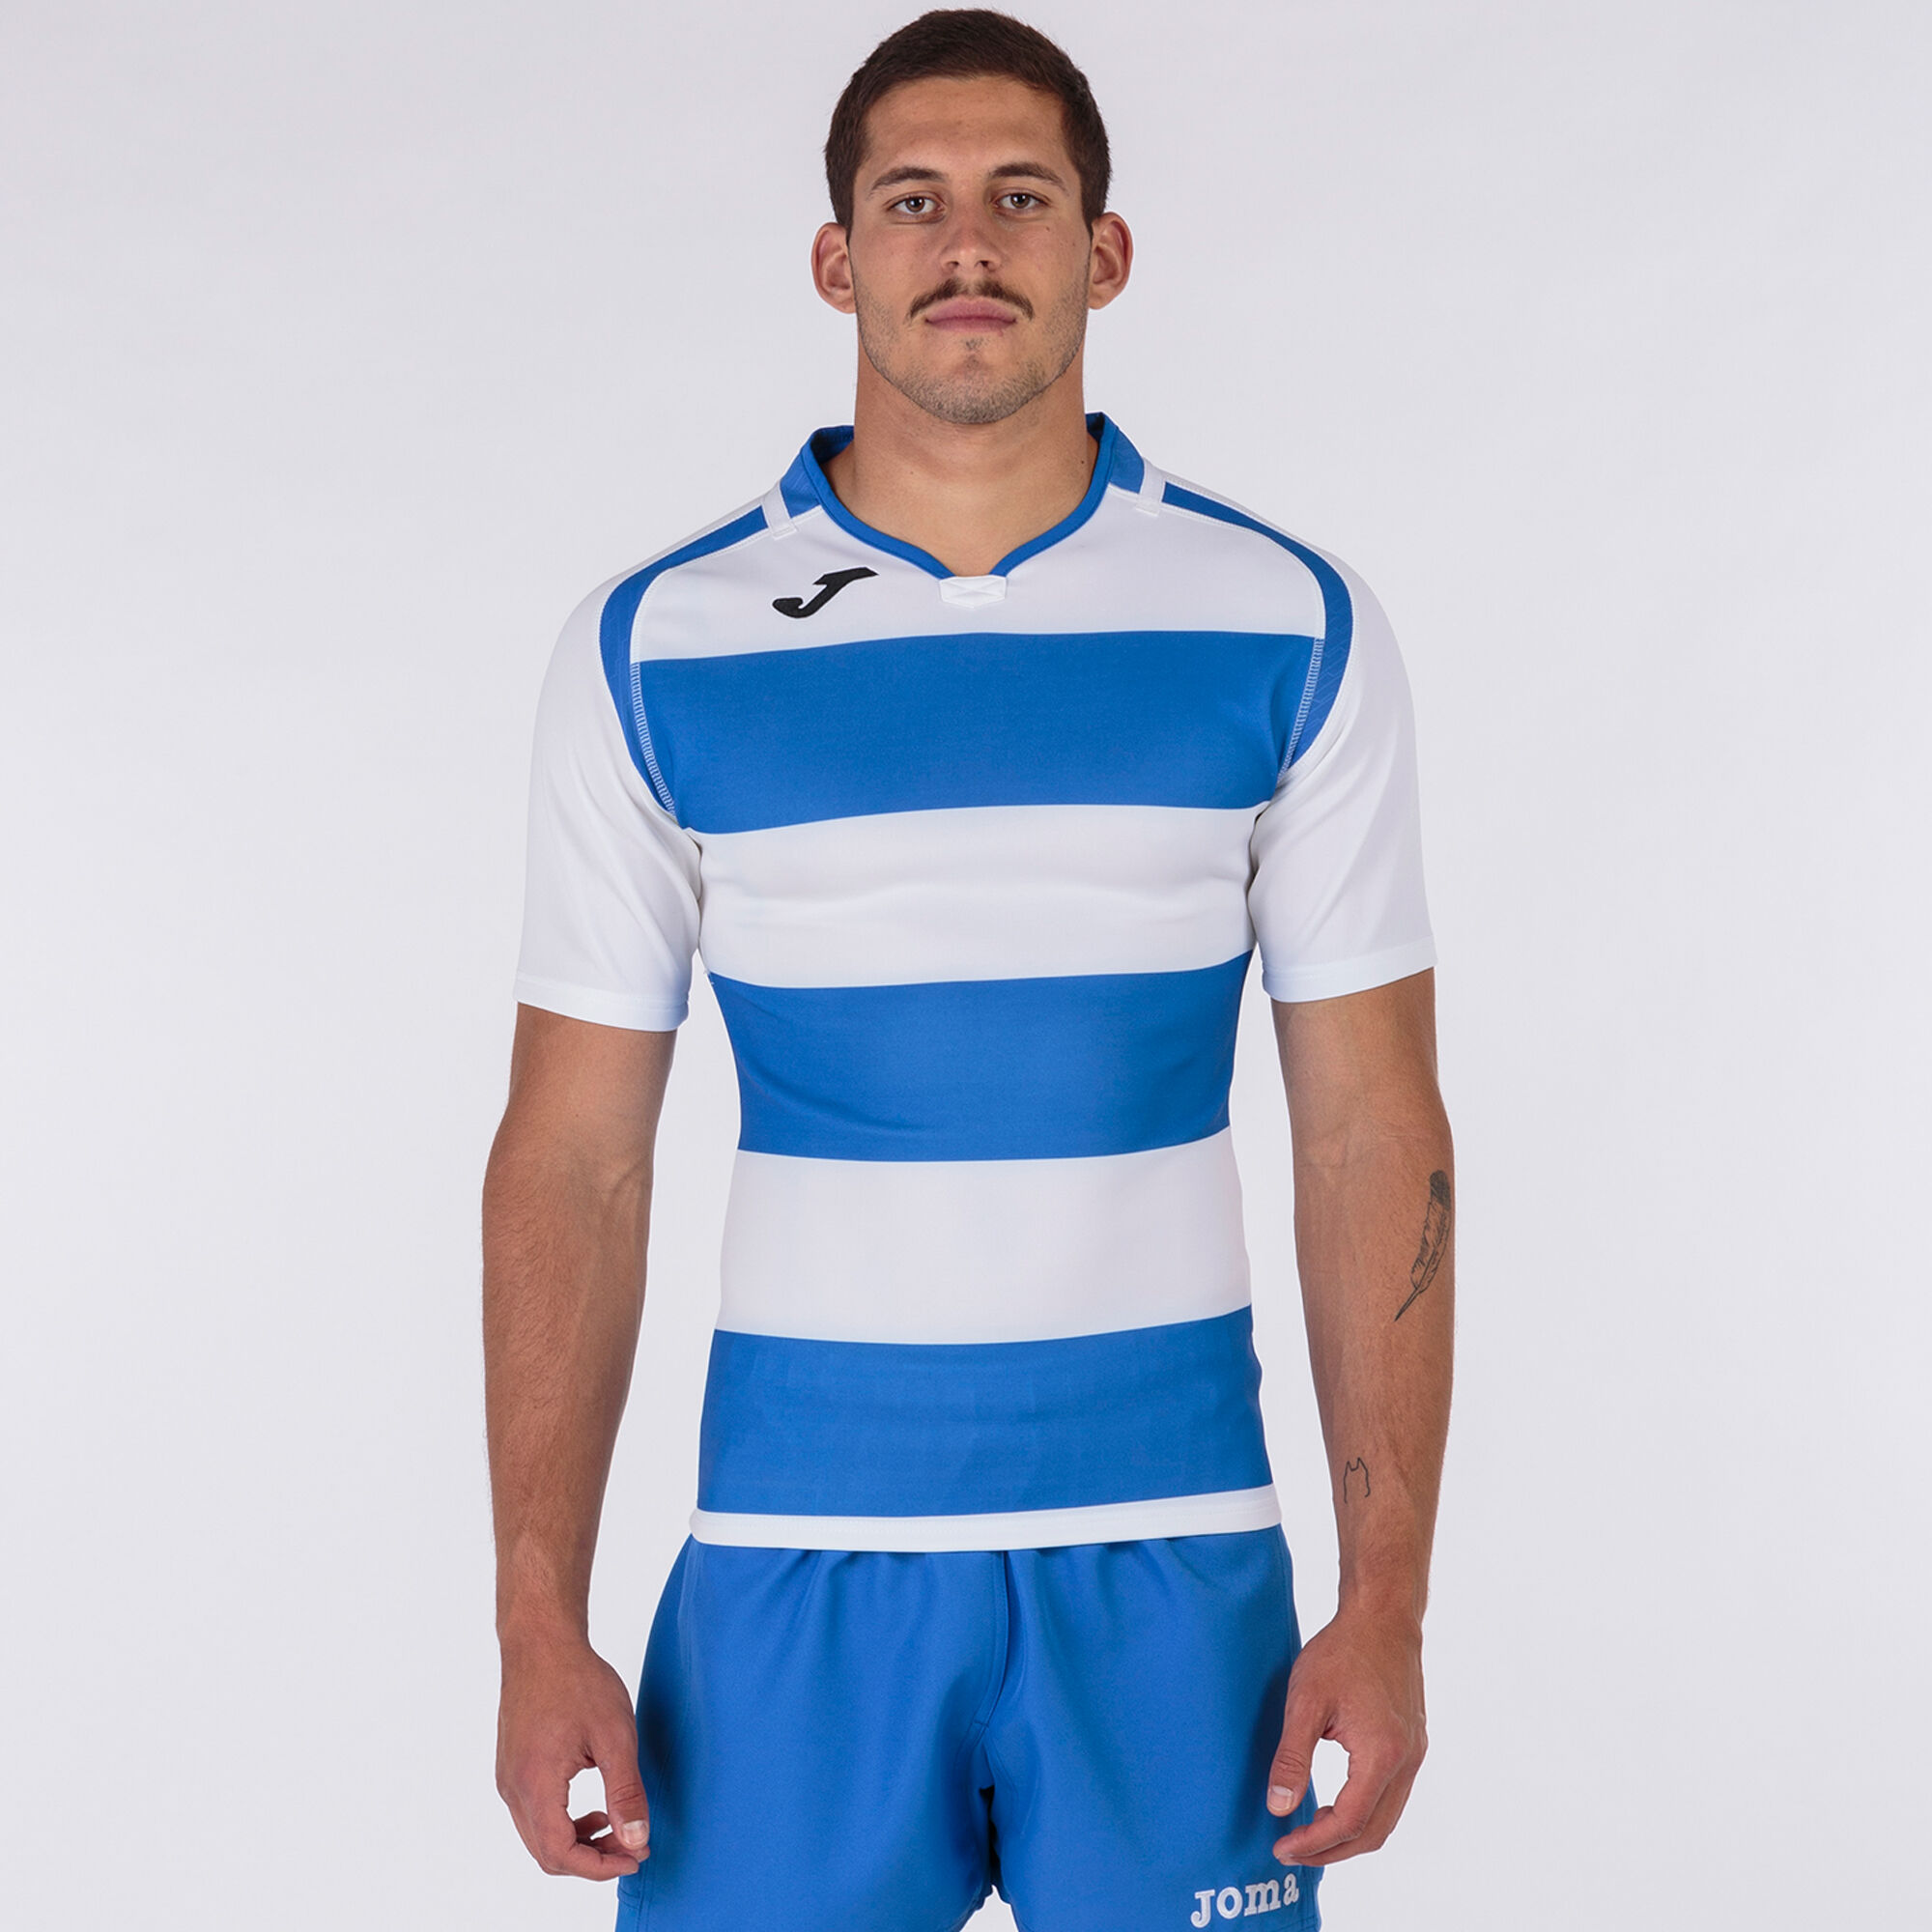 Maillot manches courtes homme Prorugby II bleu roi blanc